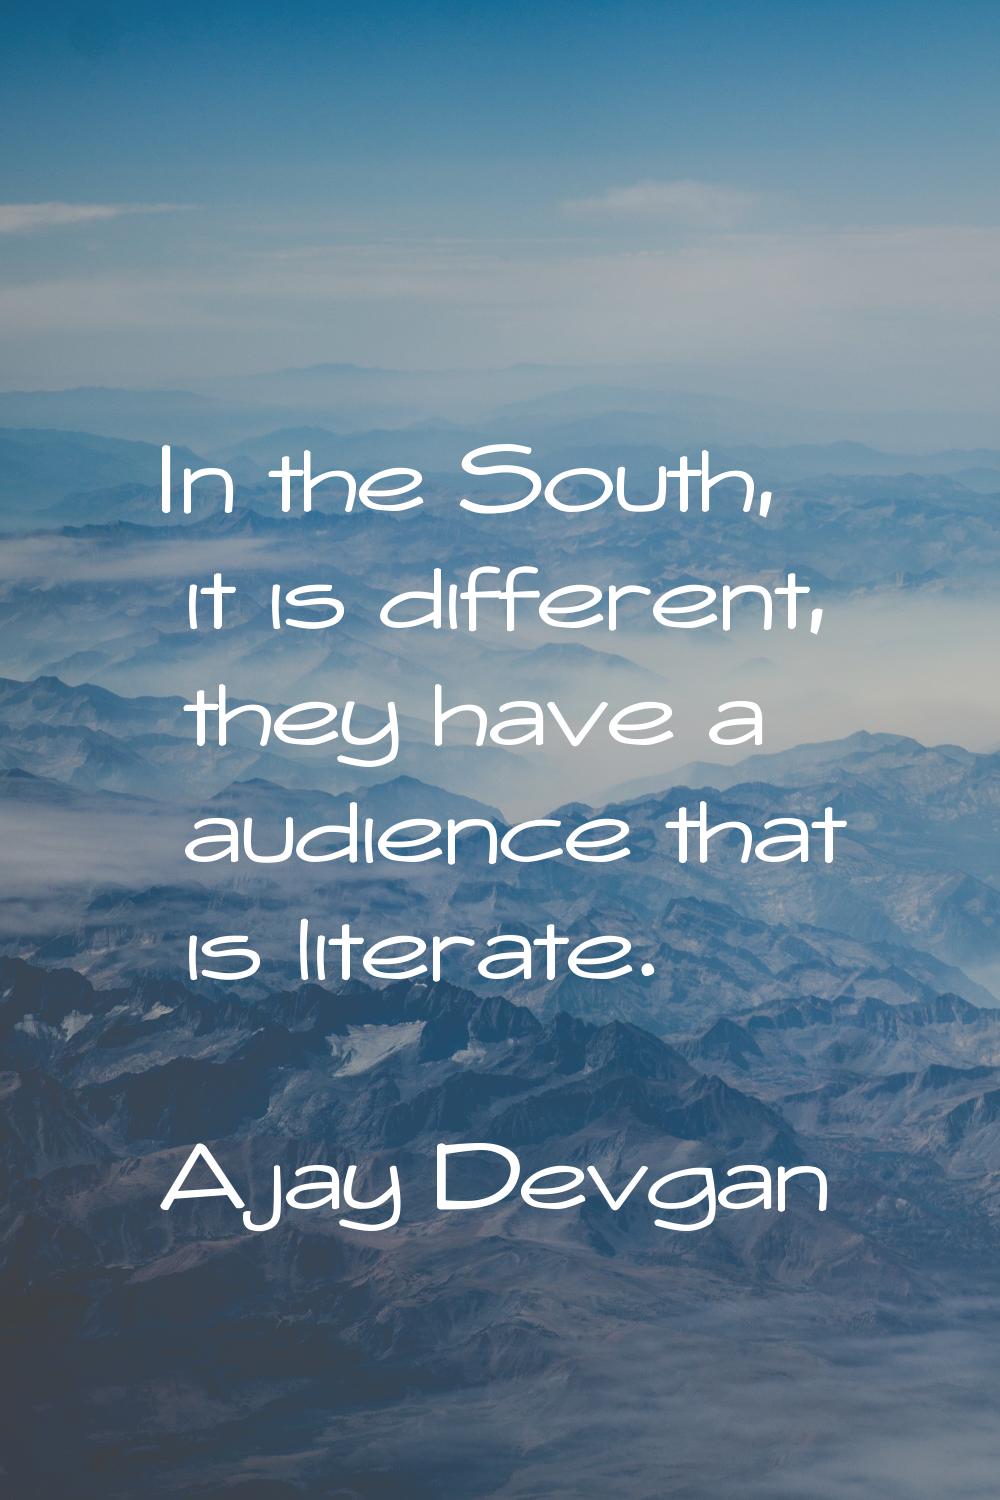 In the South, it is different, they have a audience that is literate.